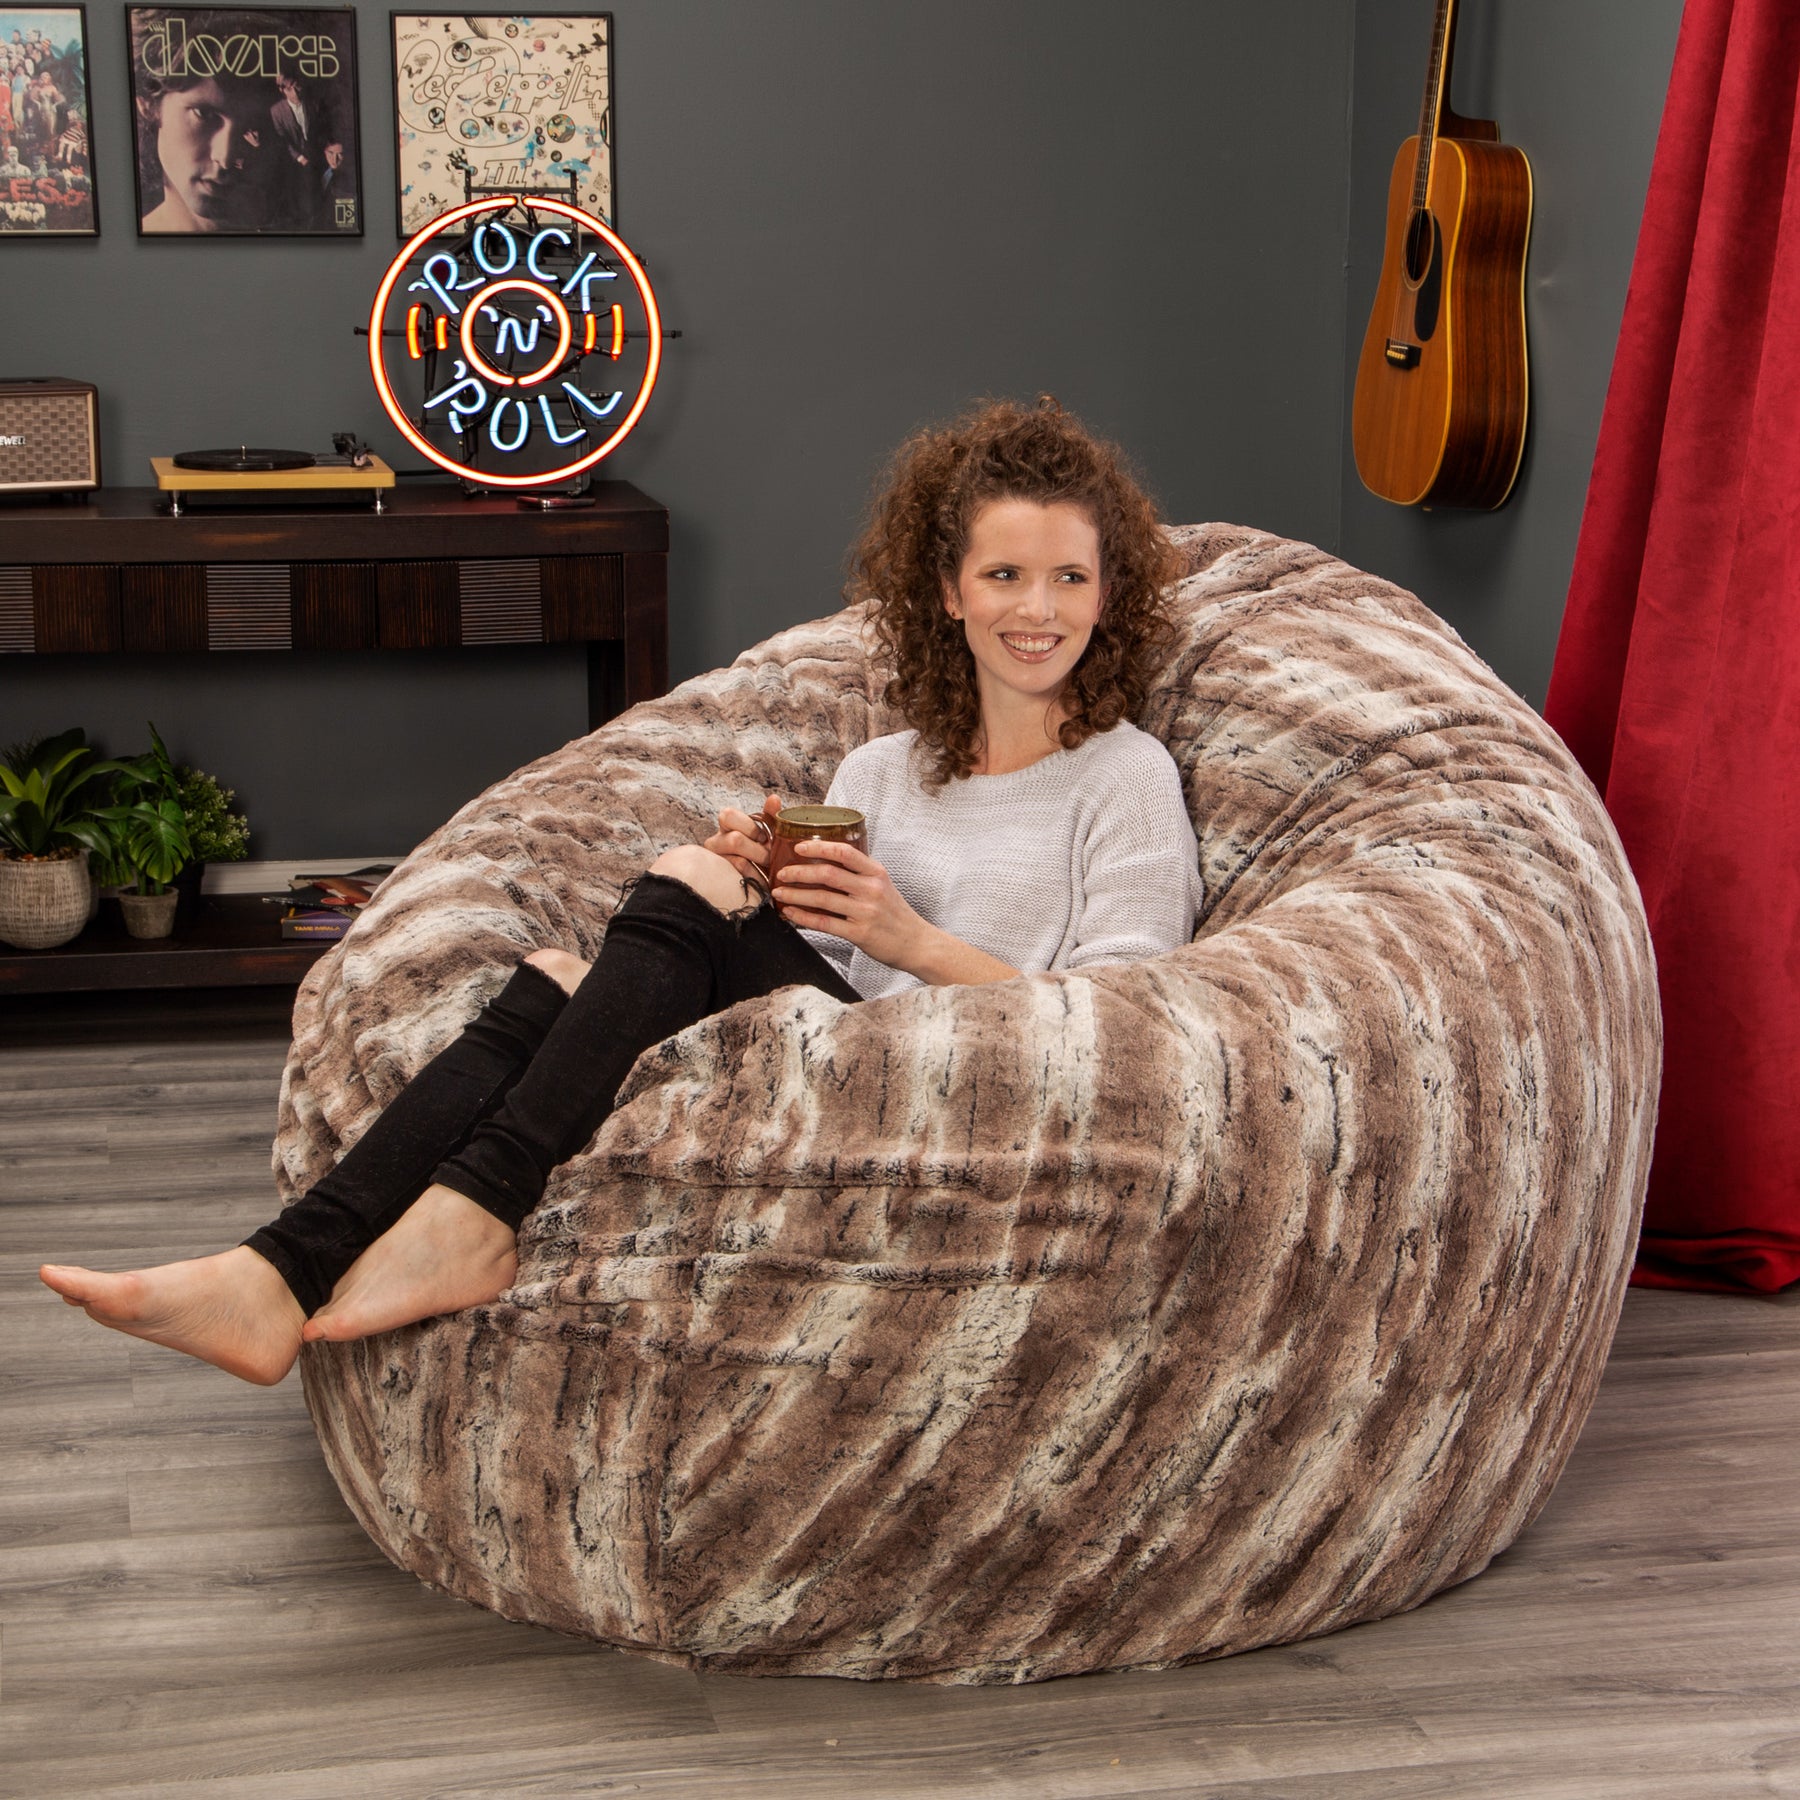 Giant Bean Bag: 6 Foot Bean Bag Chairs for Sale | Ultimate Sack